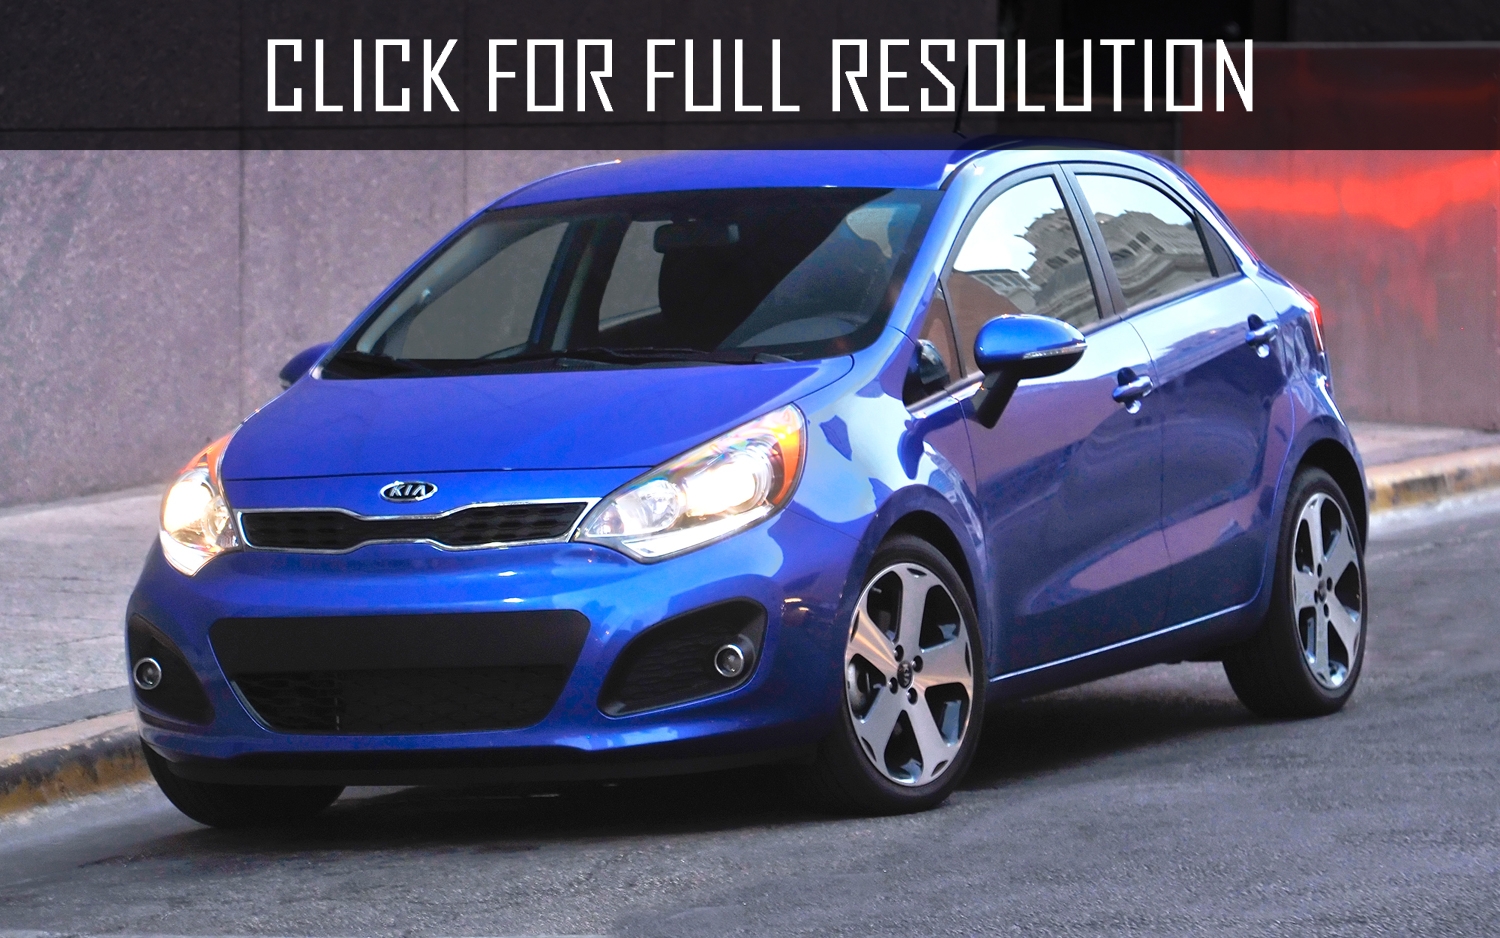 2015 Kia Rio Hatchback Best Image Gallery 7 21 Share And